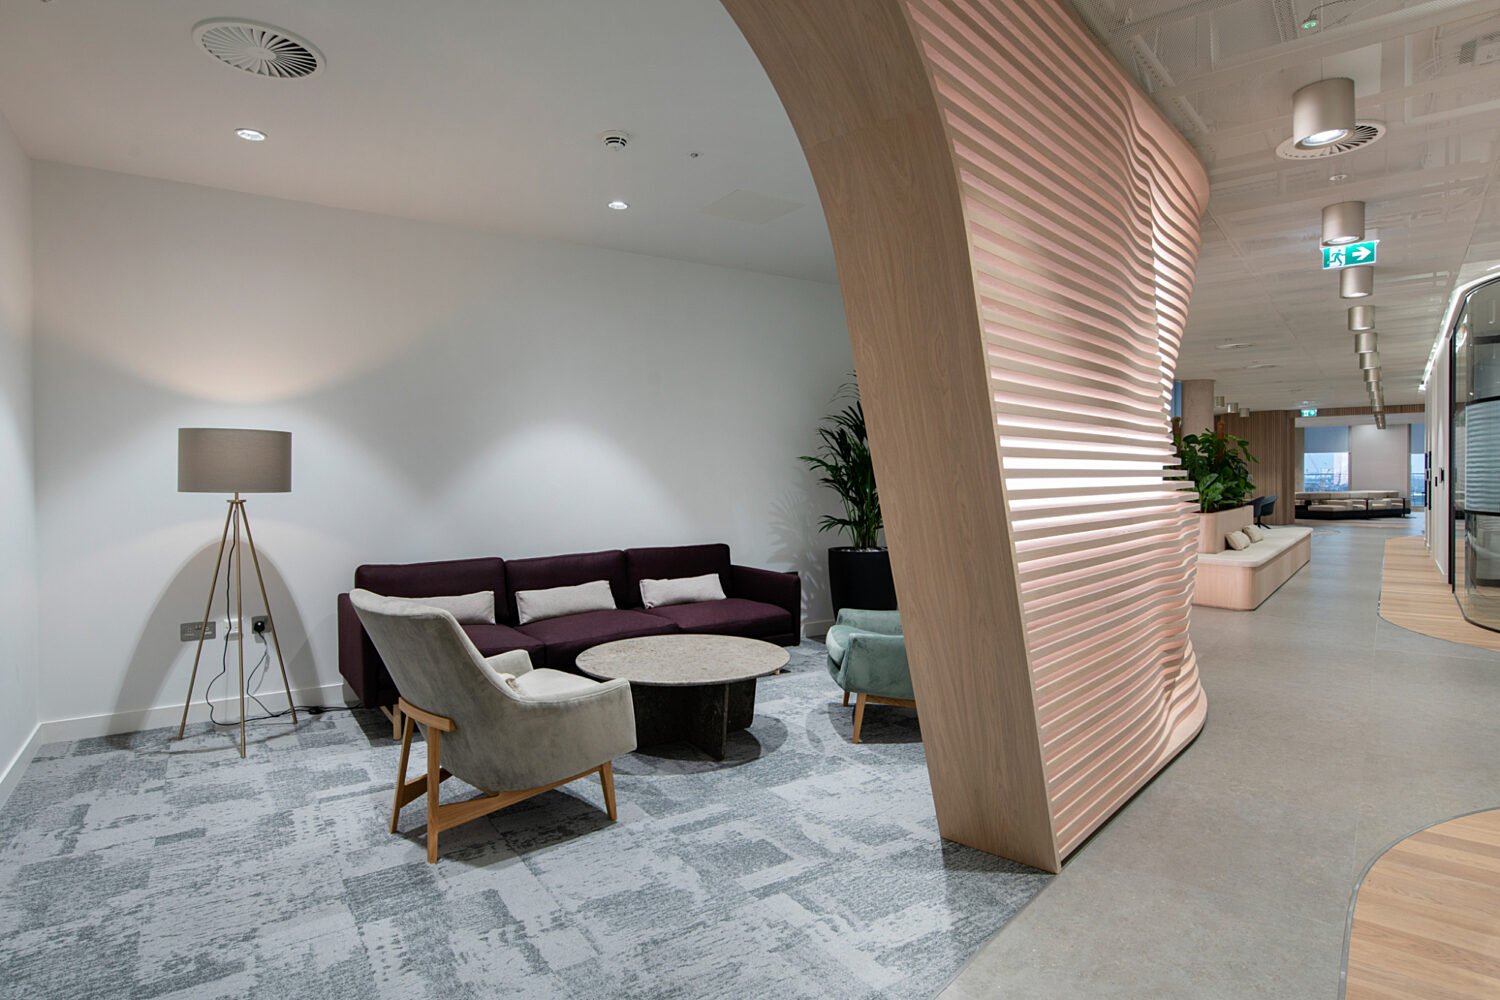 Secluded informal meeting room in London office